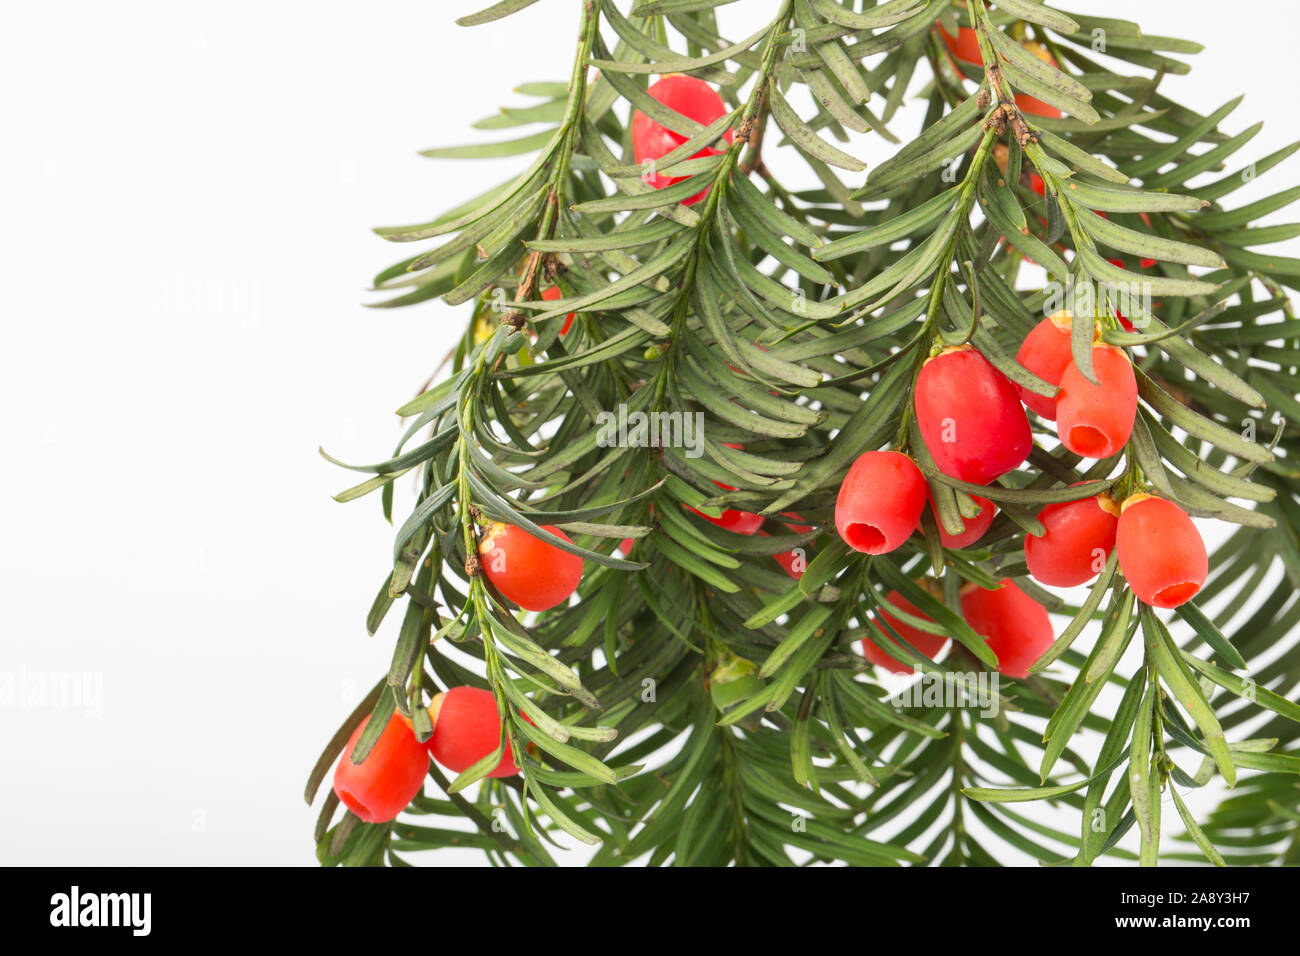 Red berries of the female yew tree, Taxus baccata, photographed in a studio against a white background. Dorset England UK GB Stock Photo